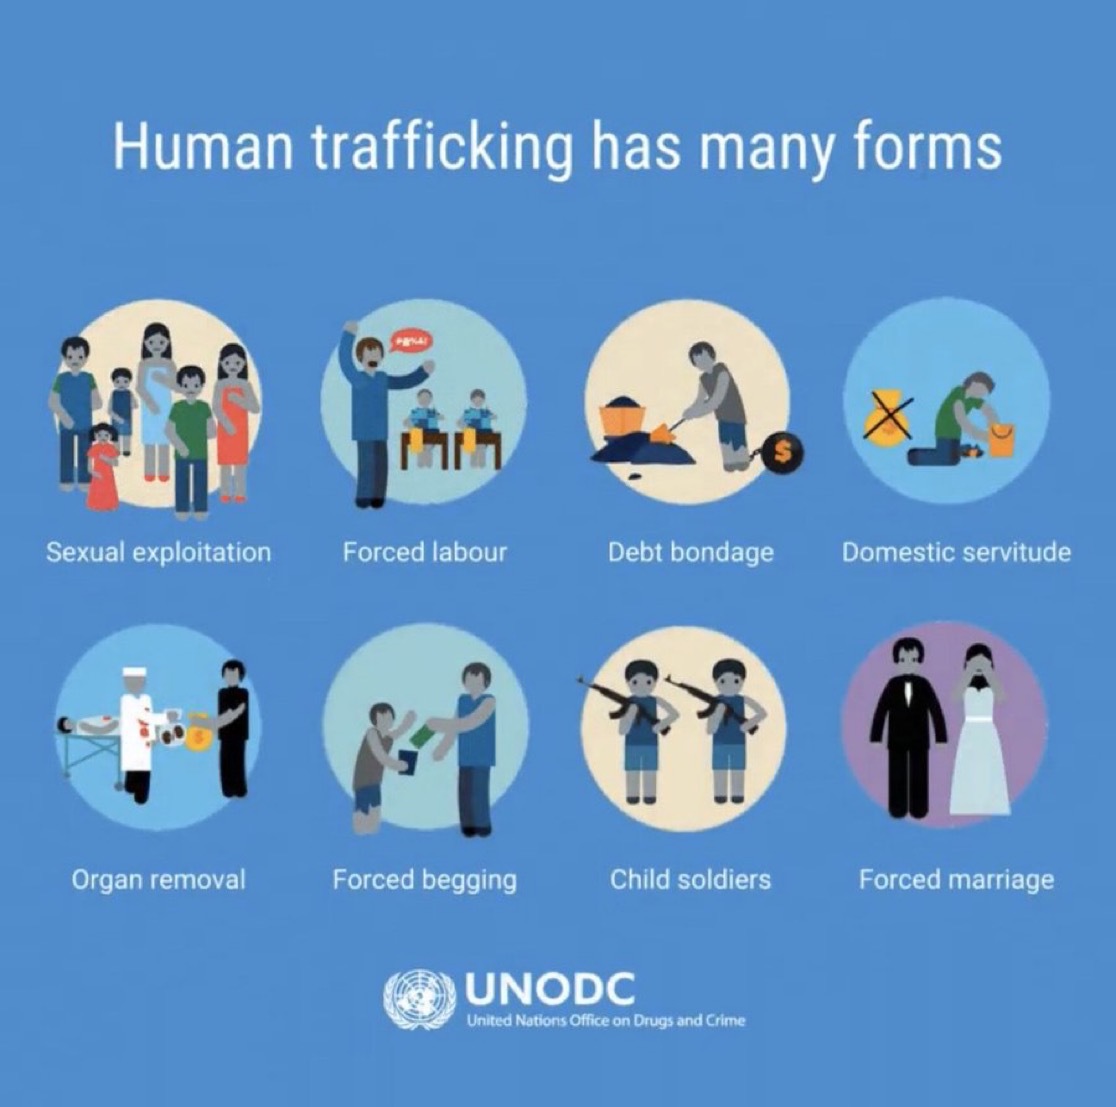 Human trafficking can take many forms —from forced marriage & sexual exploitation to forced labour in construction & agriculture. Learn more about this crime & how we work to fight it: ow.ly/3qZz50RYFWT